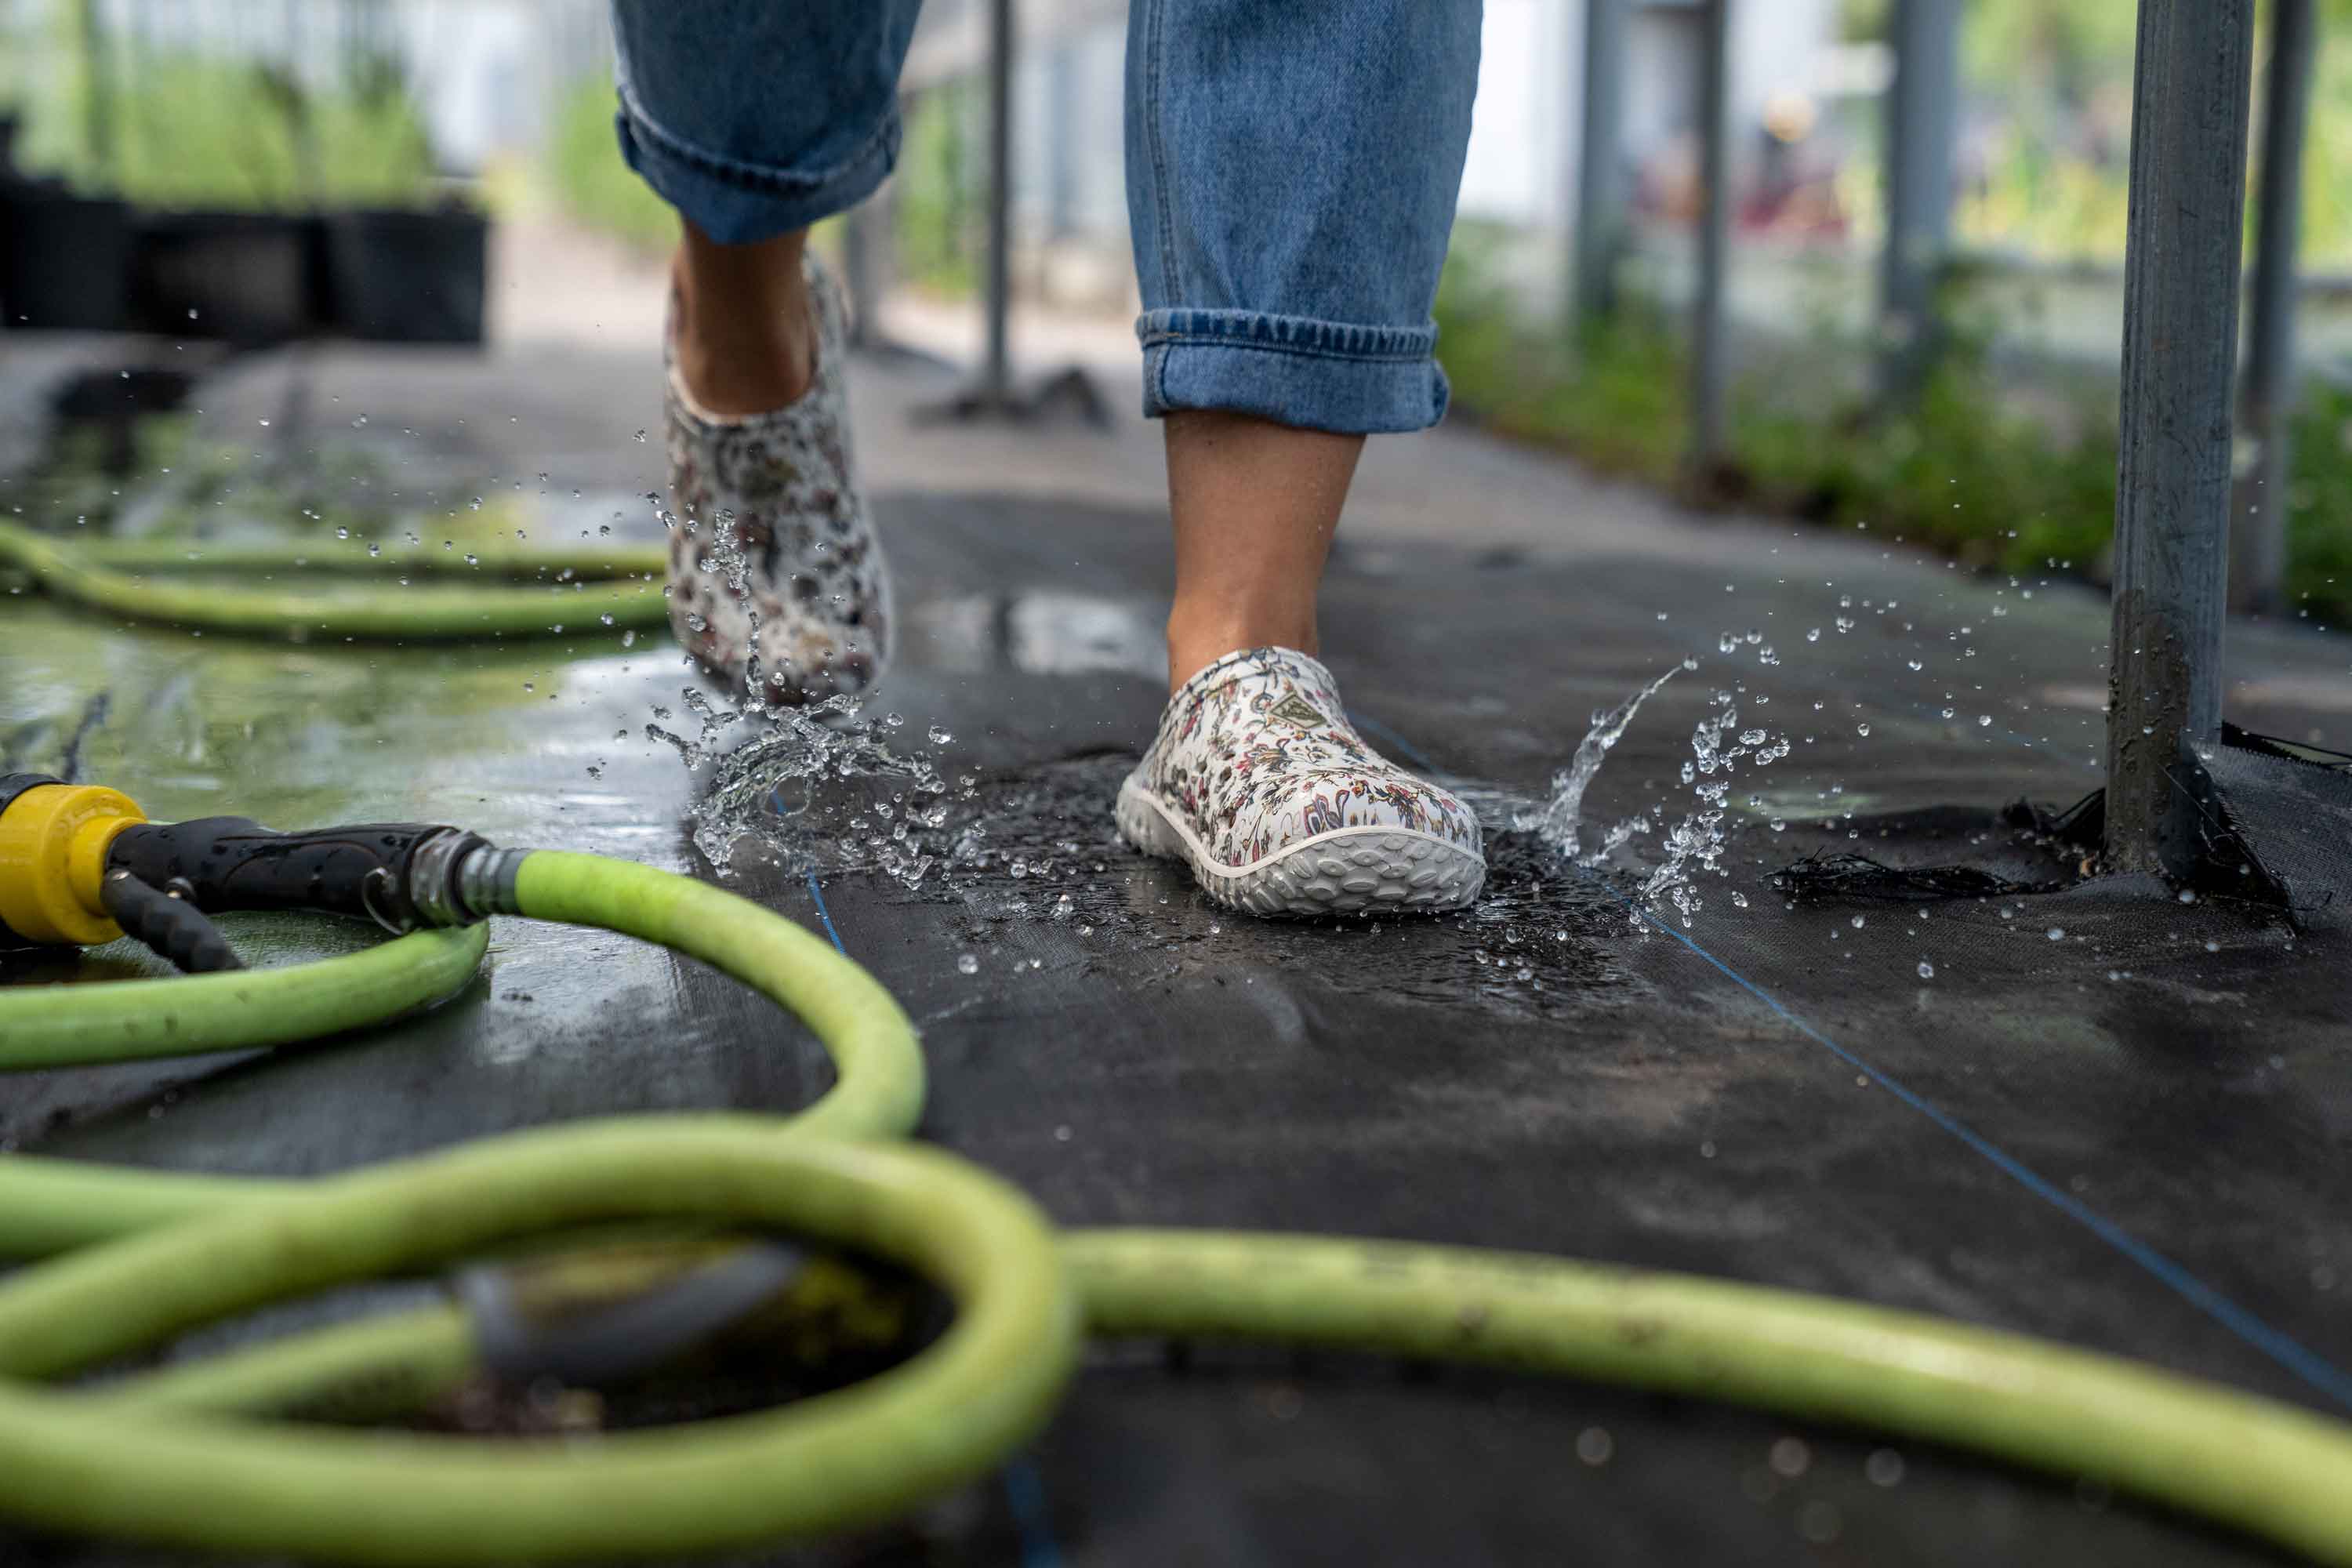 Person wearing a pair of Women's Muckster Lite Clogs walking along a wet, wooden floor with a hosepipe